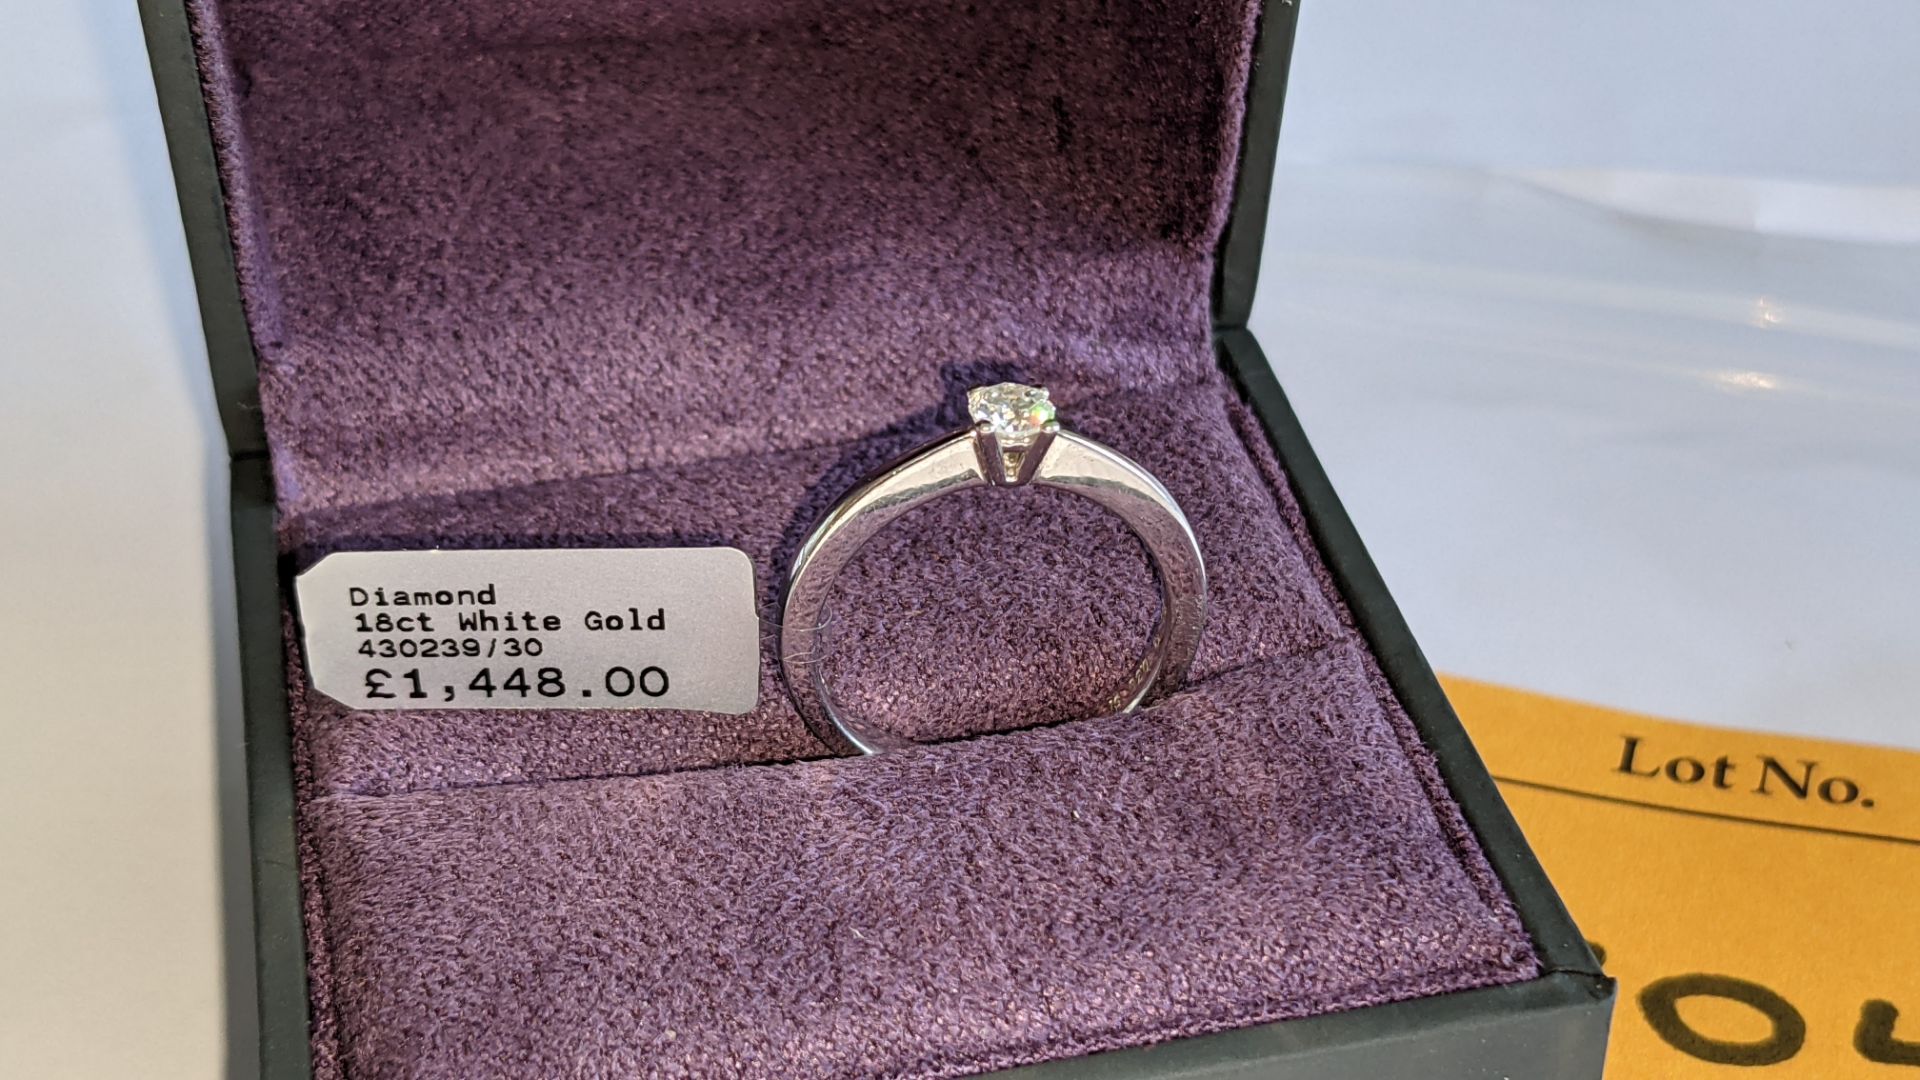 18ct white gold & diamond ring with 0.30ct H/Si stone RRP £1,448 - Image 6 of 15